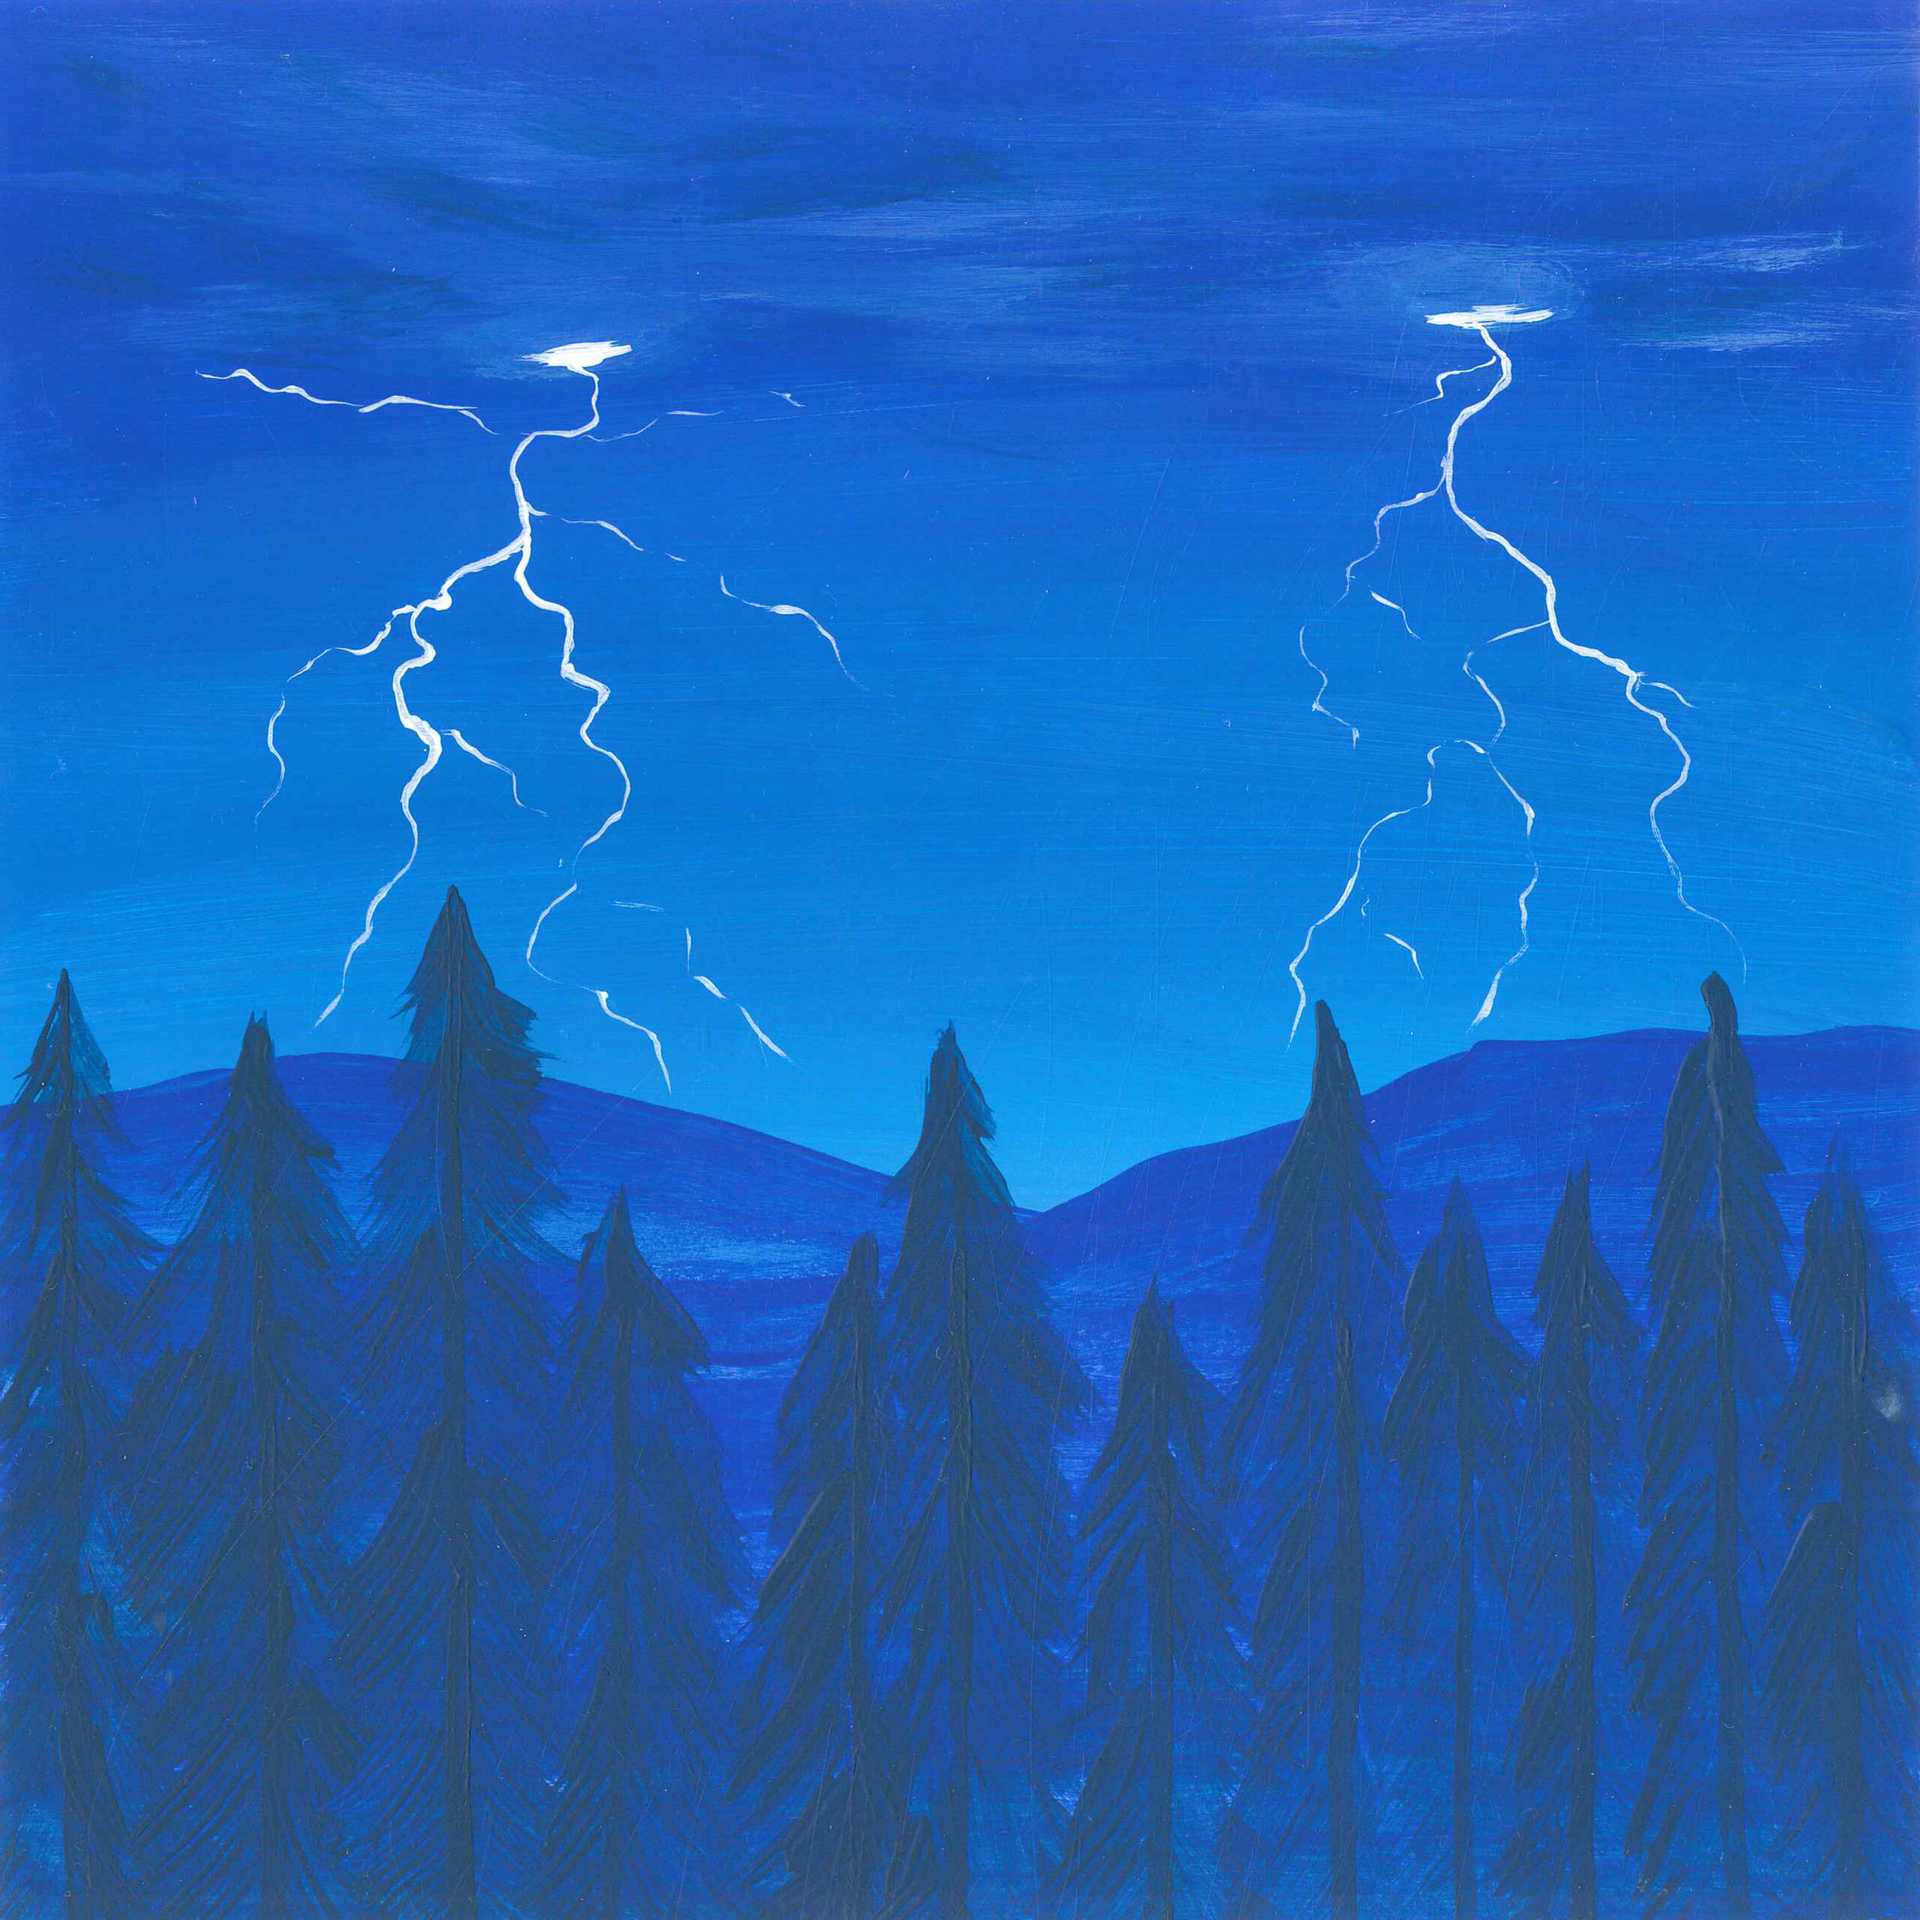 Summer Thunderstorm at Mountain Ridge - nature landscape painting - earth.fm